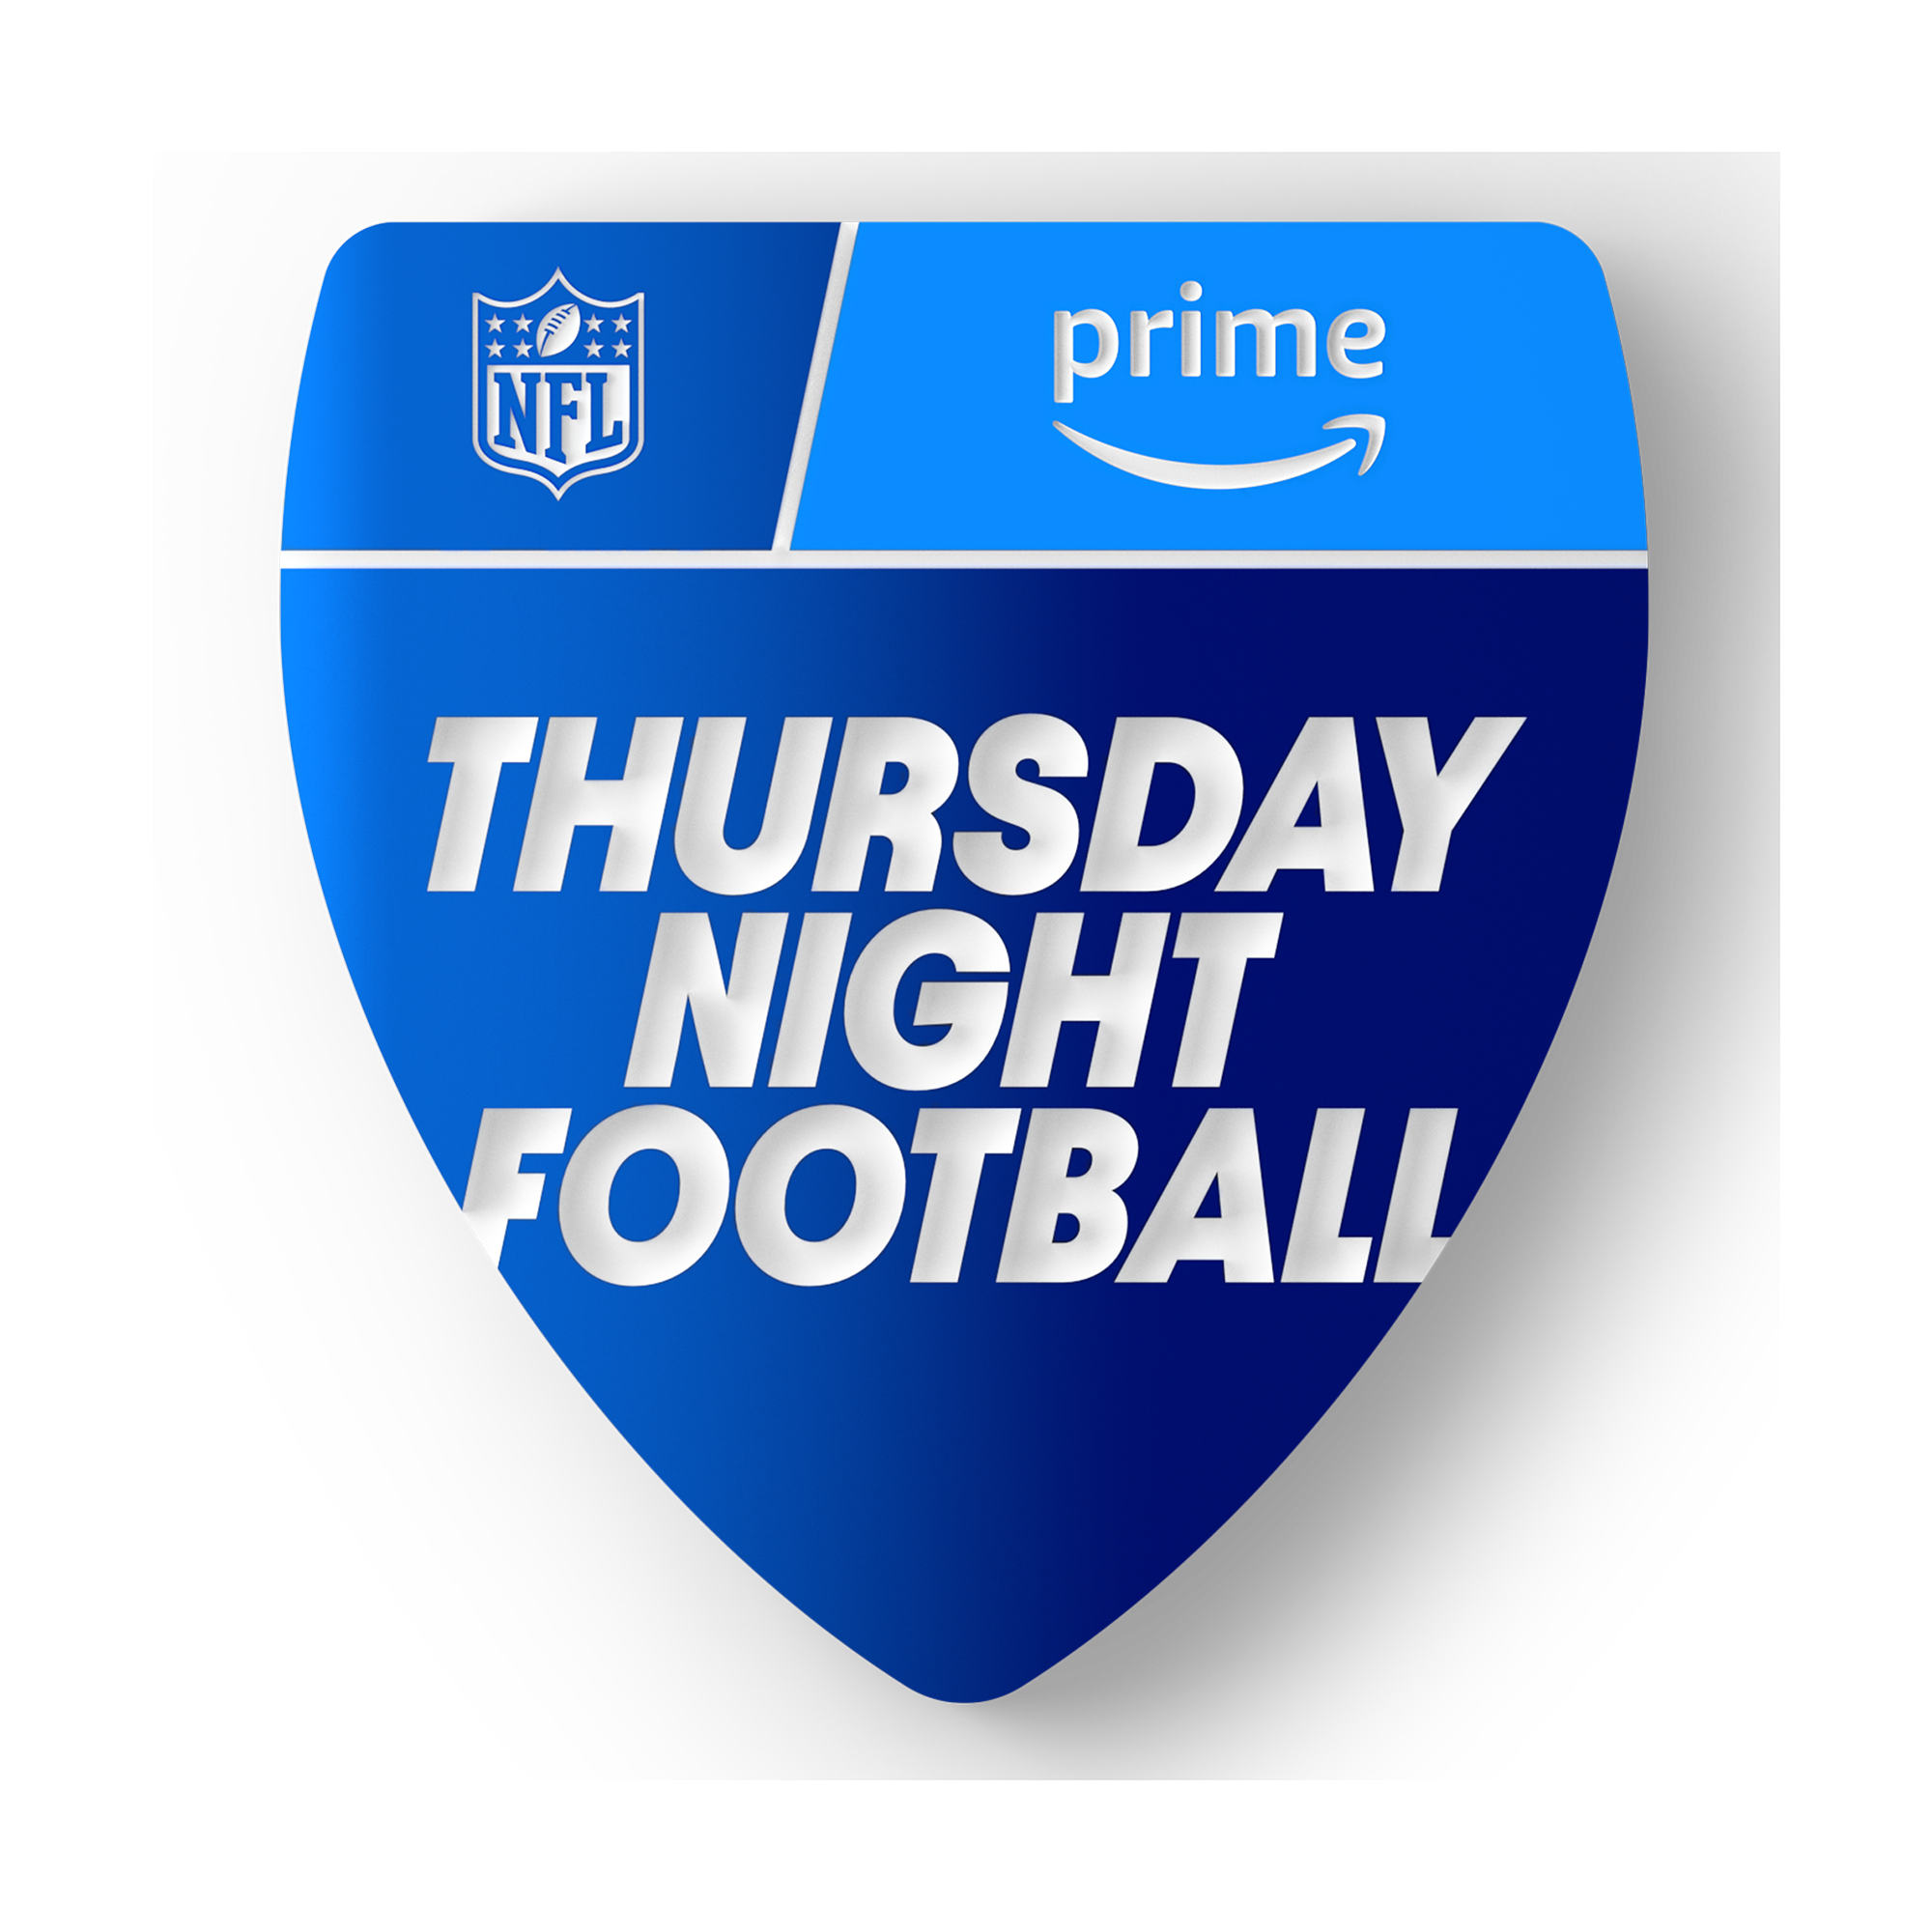 who's playing on thursday night football tonight